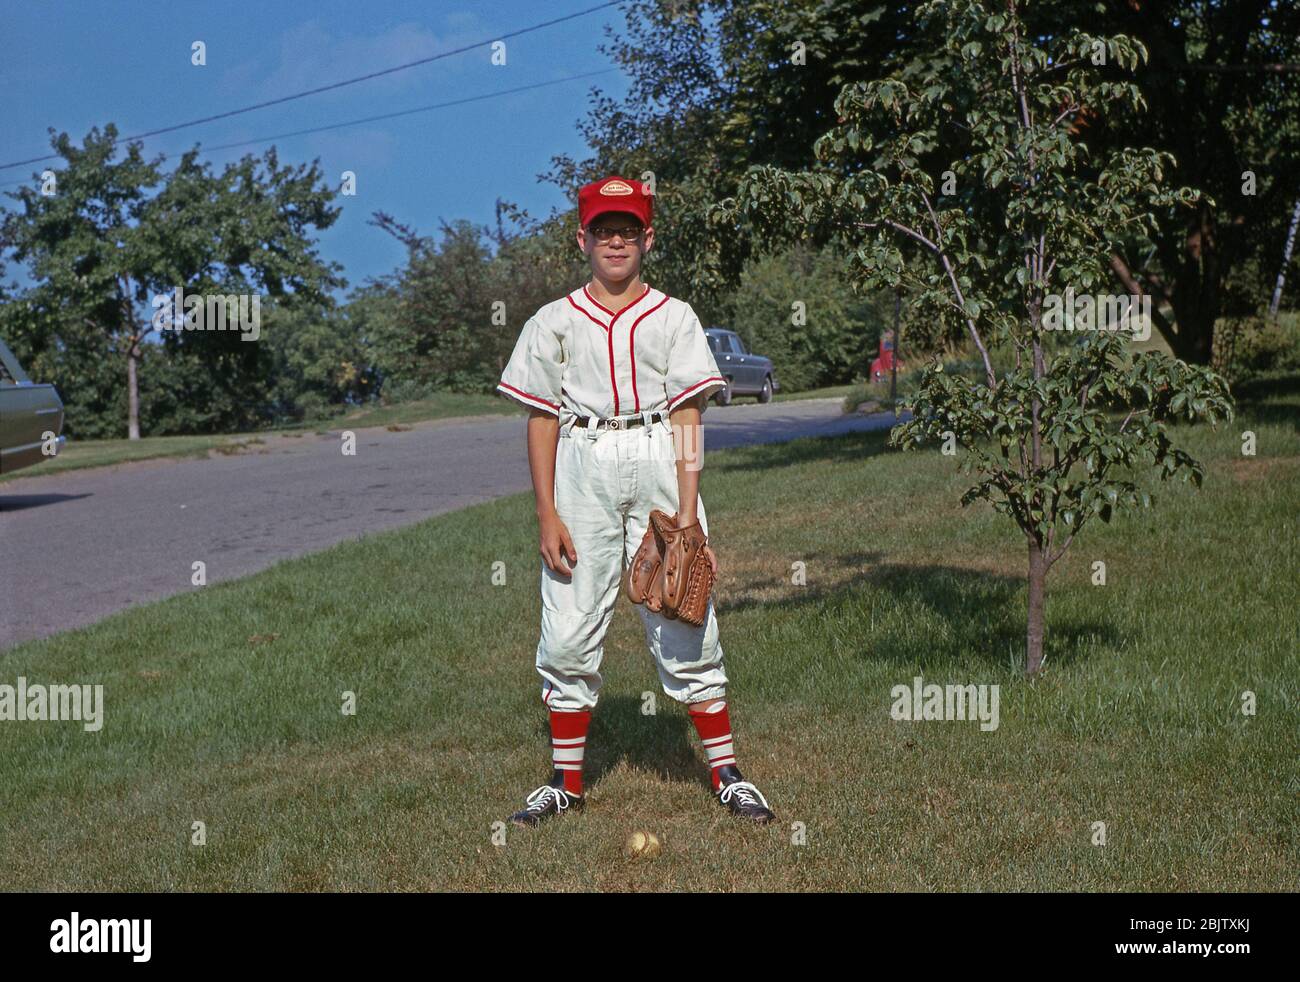 A young boy poses in his front garden wearing his baseball kit, USA c. 1960. He has his baseball mitt on, his white uniform has red trim and he a red cap and wears red socks. A baseball is at his feet. Players on a baseball team wear matching uniforms. Originally a team was identified by the colours of their stockings and the success of the Cincinnati Red Stockings popularised the adoption of sock colour as the club identity. Stock Photo